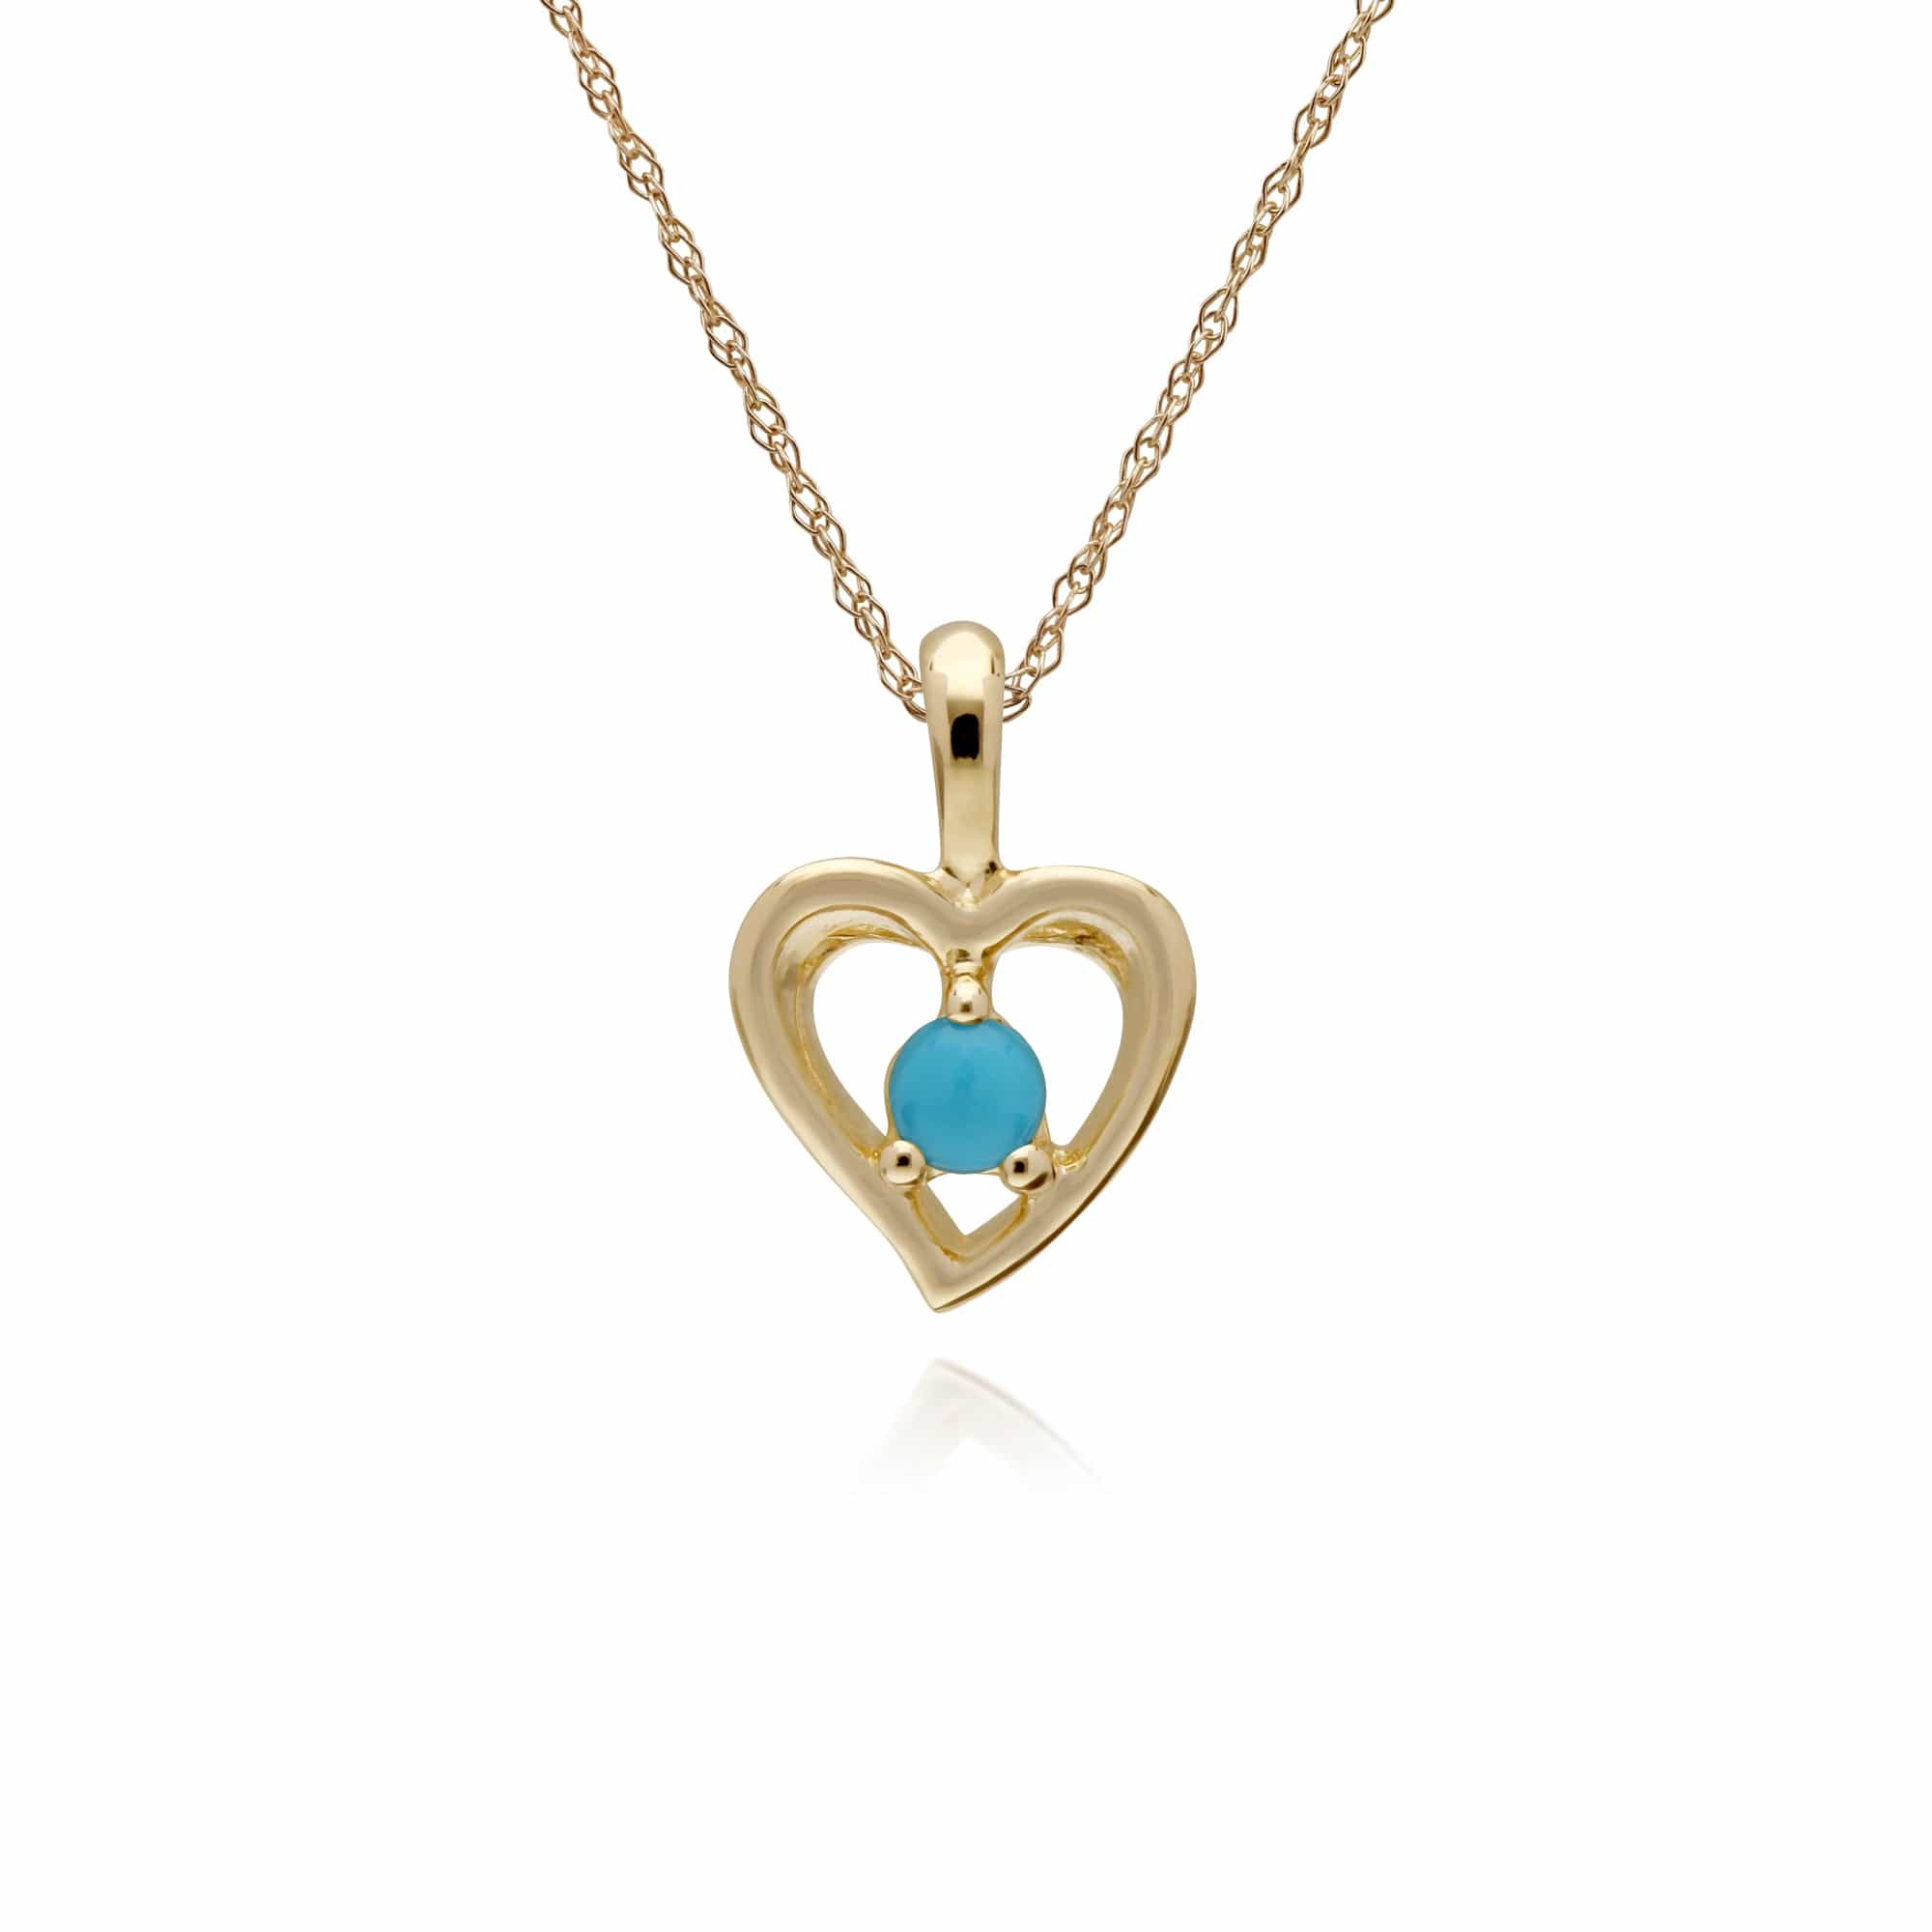 135E1564019-135P1902019 Classic Round Turquoise Single Stone Heart Stud Earrings & Necklace Set in 9ct Yellow Gold 3